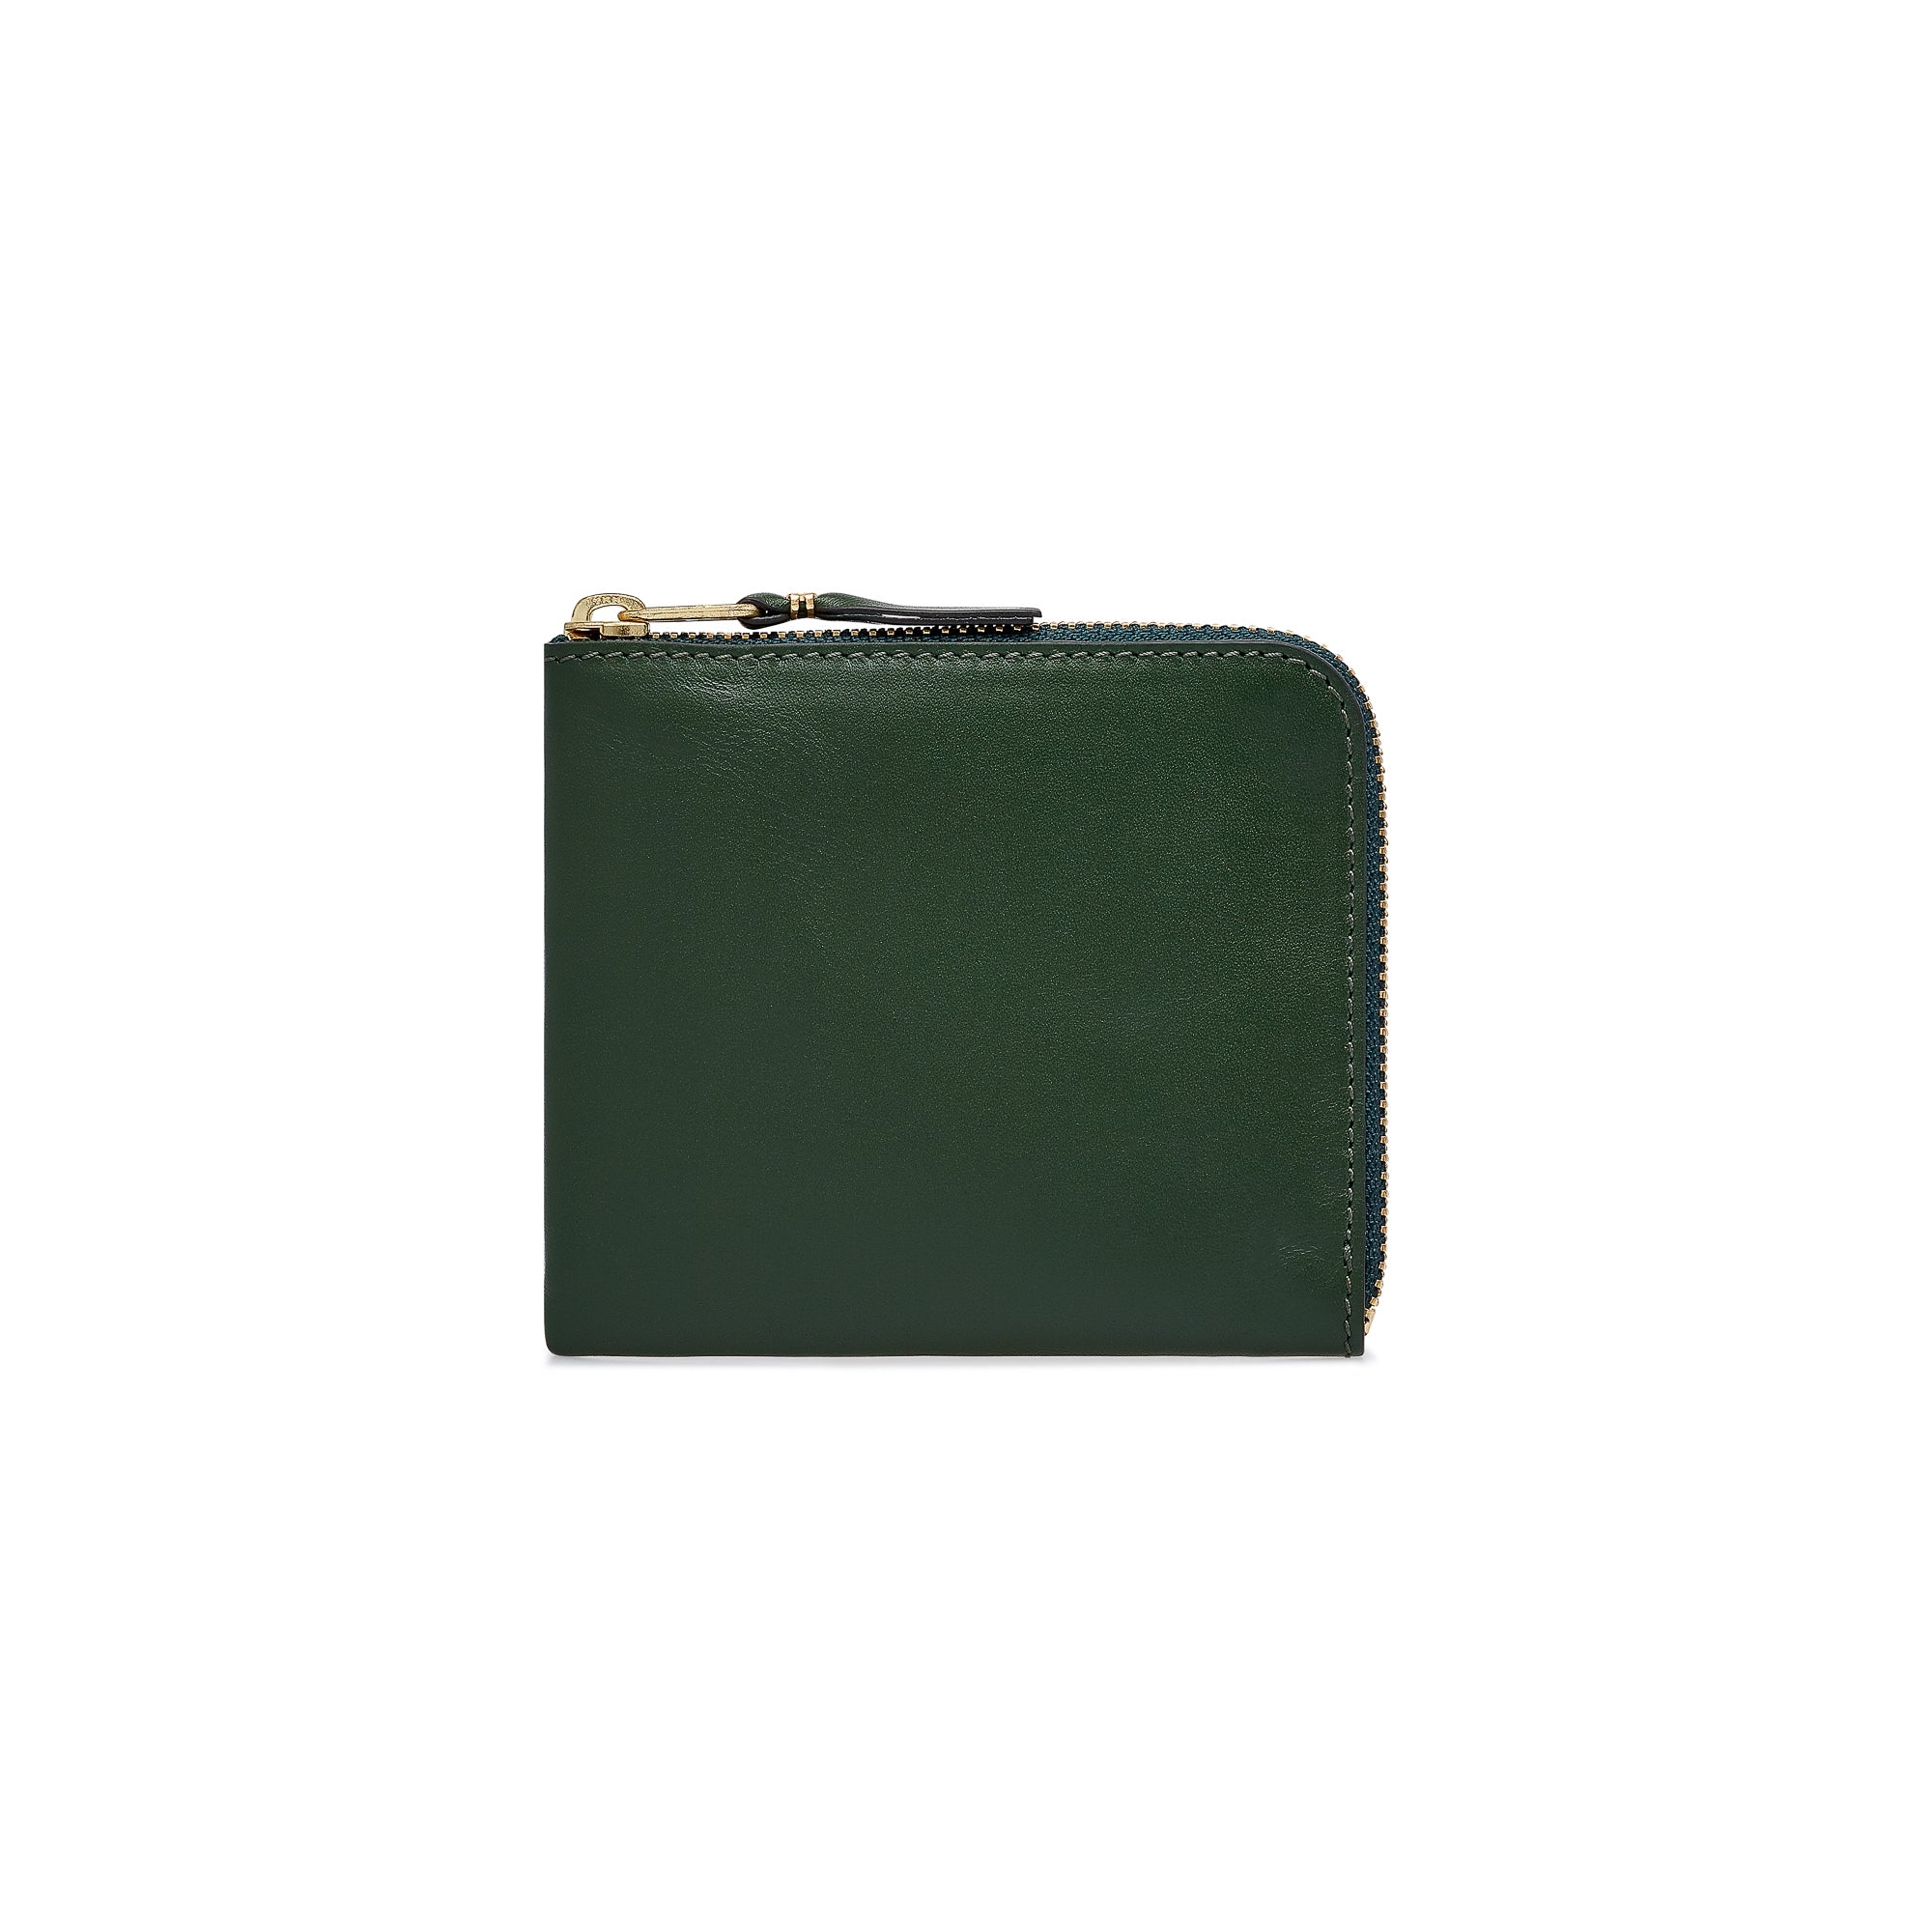 CDG Wallet - Classic Colour Zip Around Wallet - (SA3100 Bottle Green) view 1